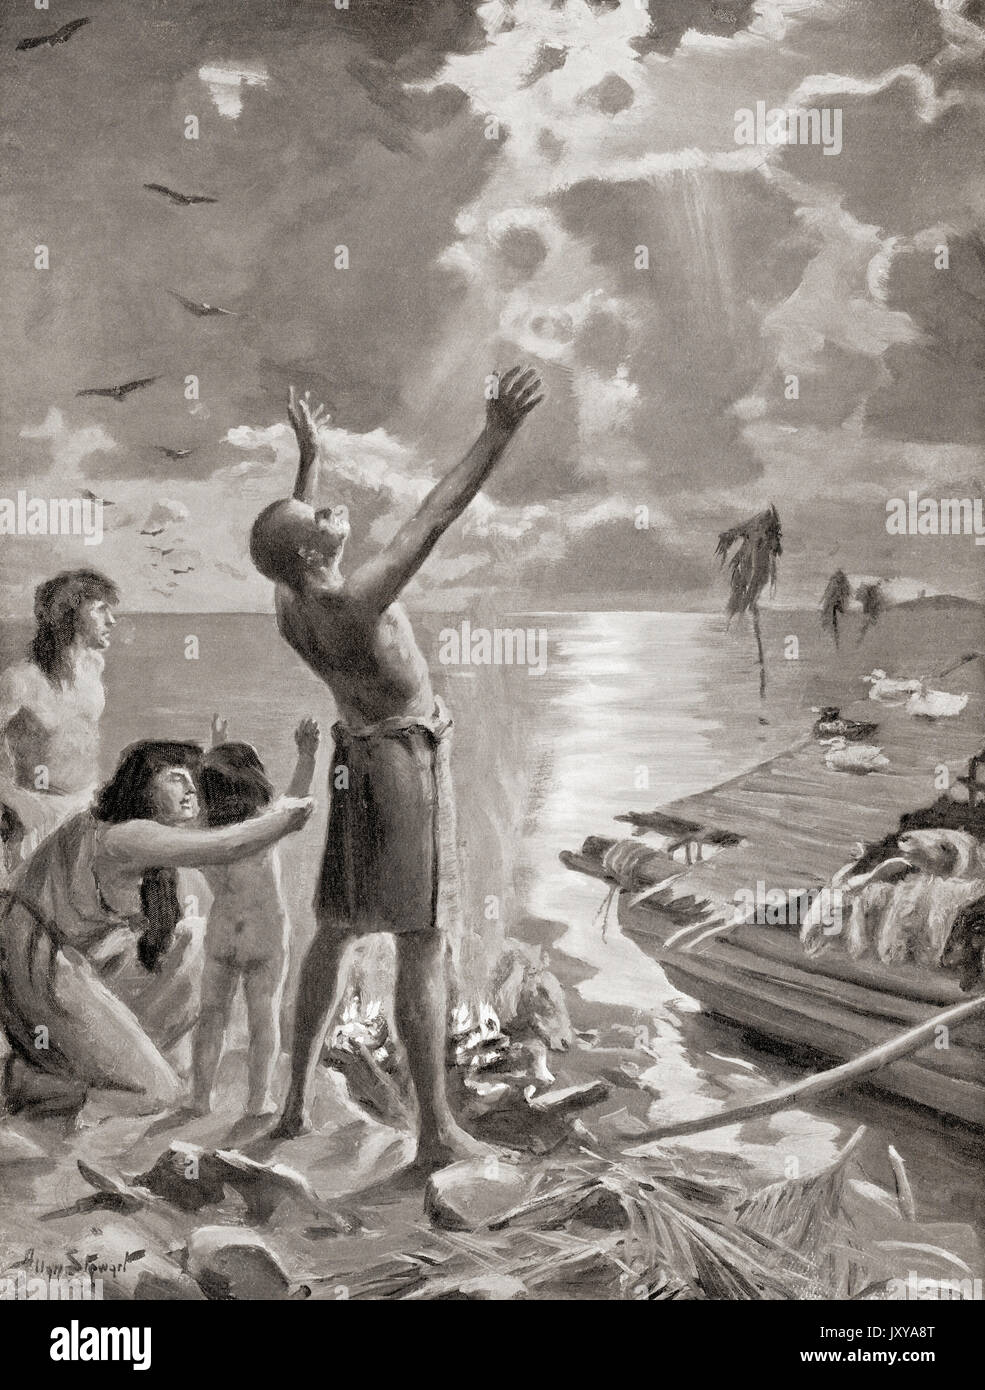 Zingiddu's sacrifice after the flood.  The priest-king Zingiddu, after being divinely warned of the approach of a flood, escaped in his boat with family and animals and when after 7 days the rain stopped, sacrificed an ox and a sheep to Enlil, the chief Sumerian deity.  After the painting by Allan Stewart, (1865-1951).  From Hutchinson's History of the Nations, published 1915. Stock Photo